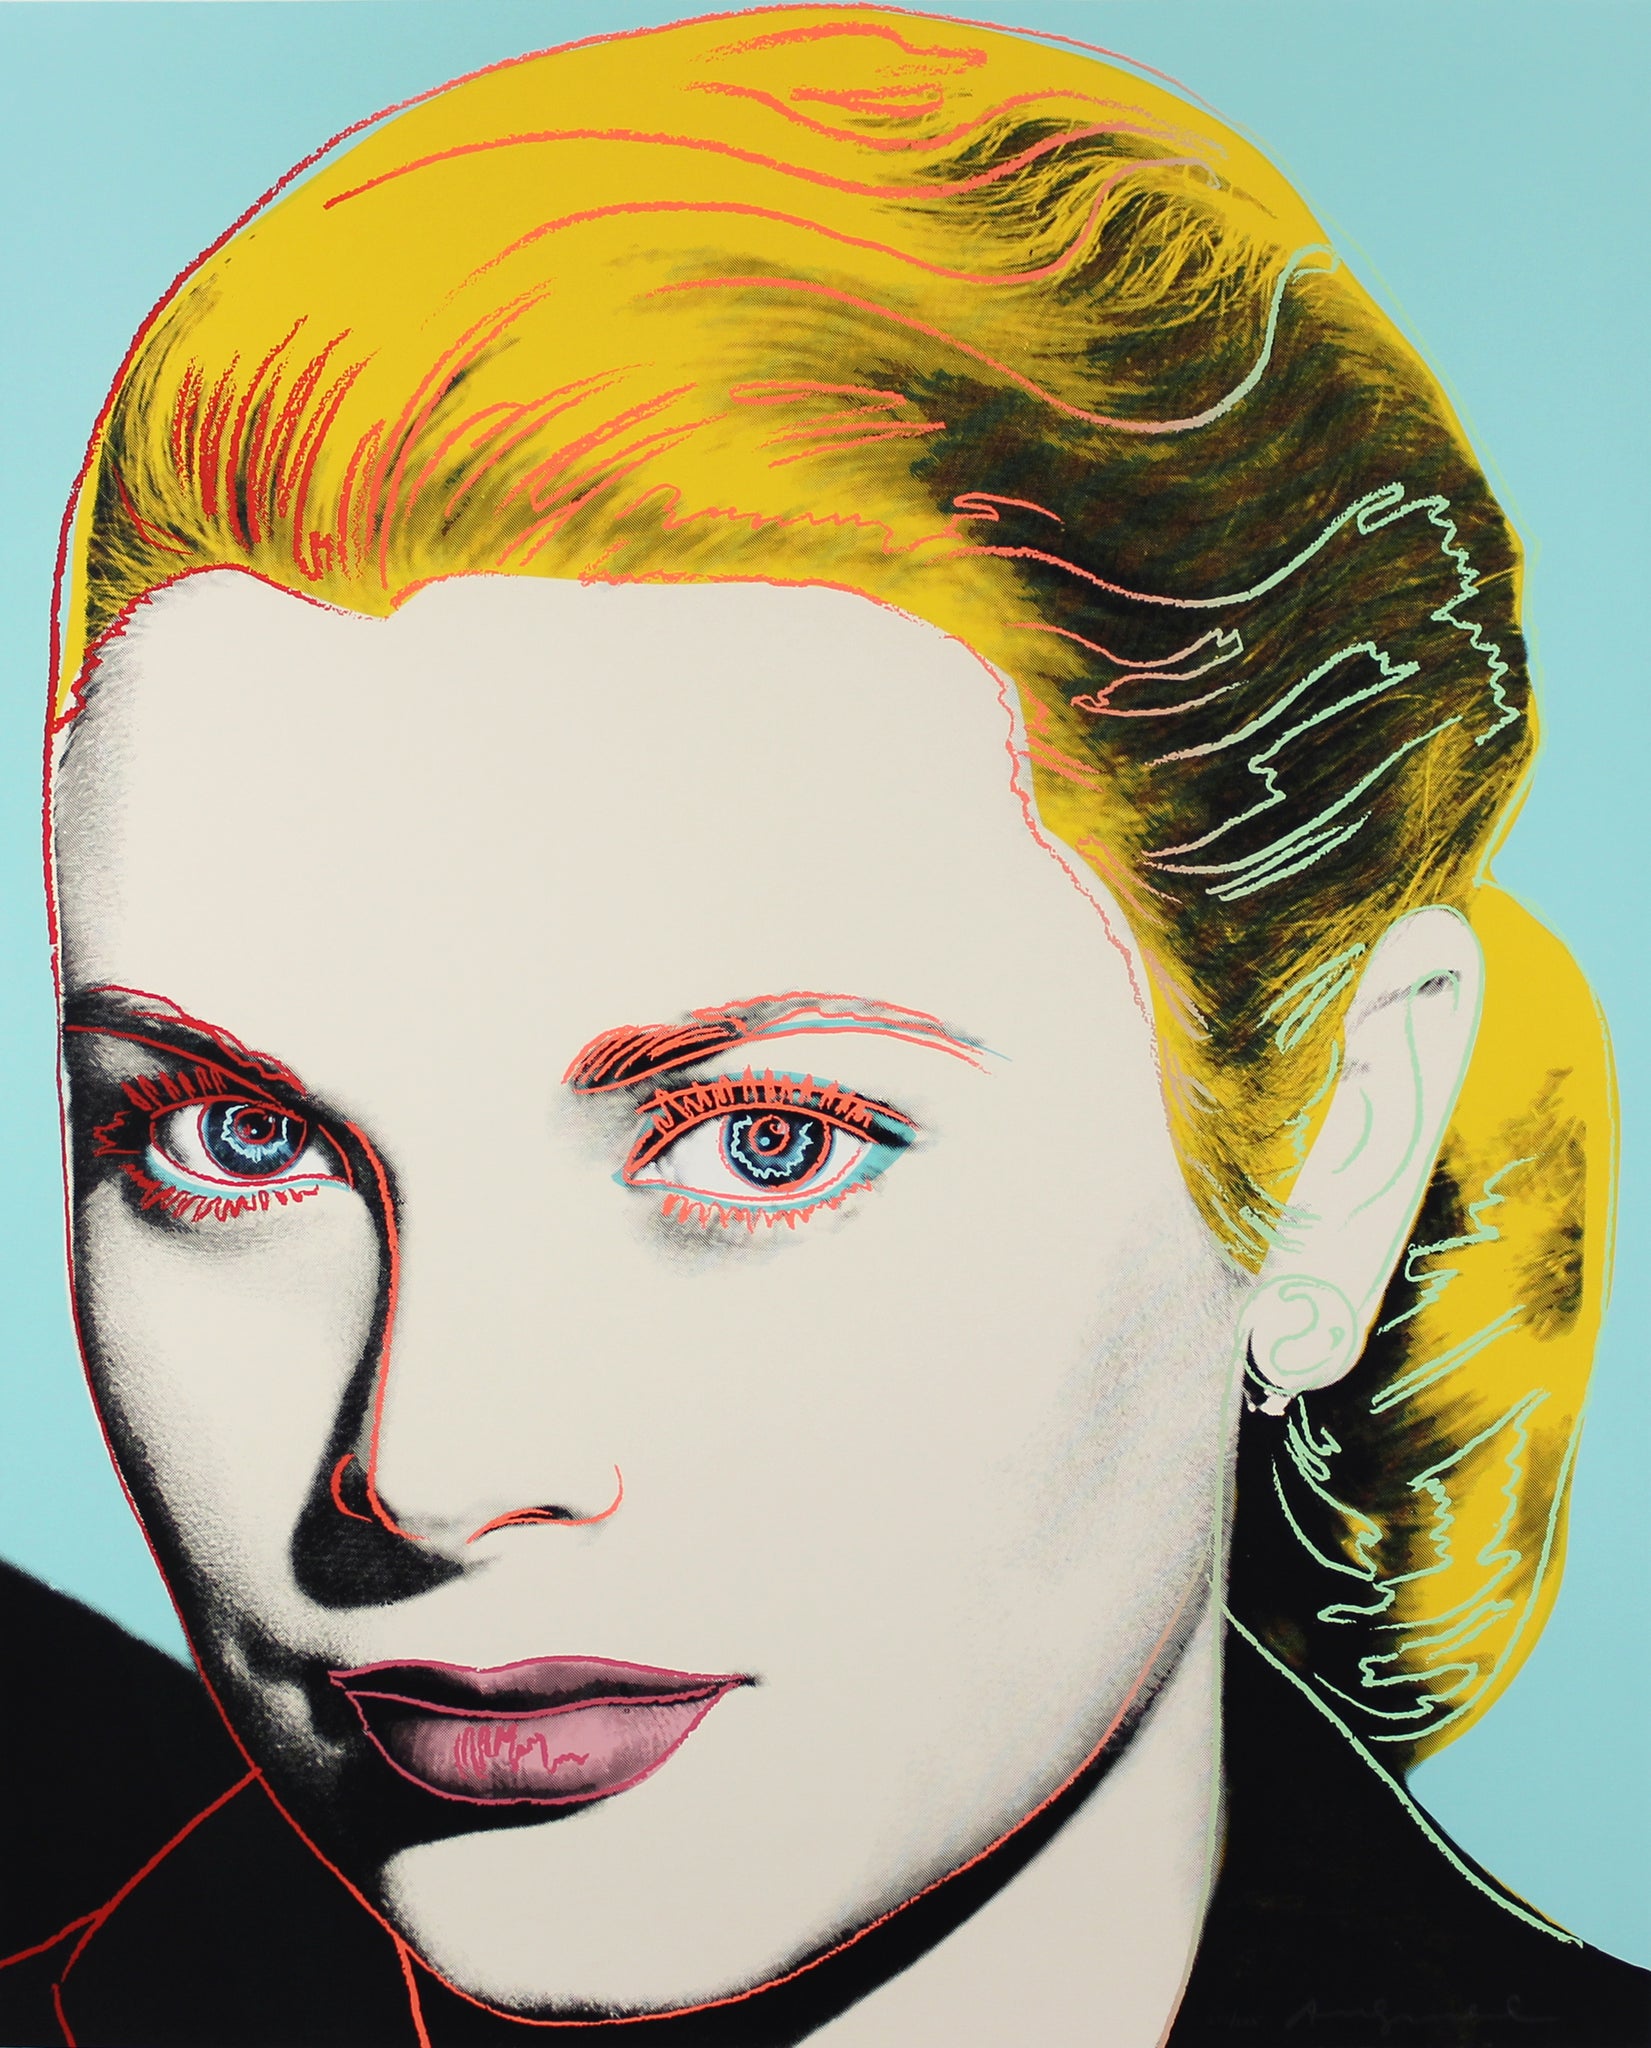 Why you should invest in an Andy Warhol